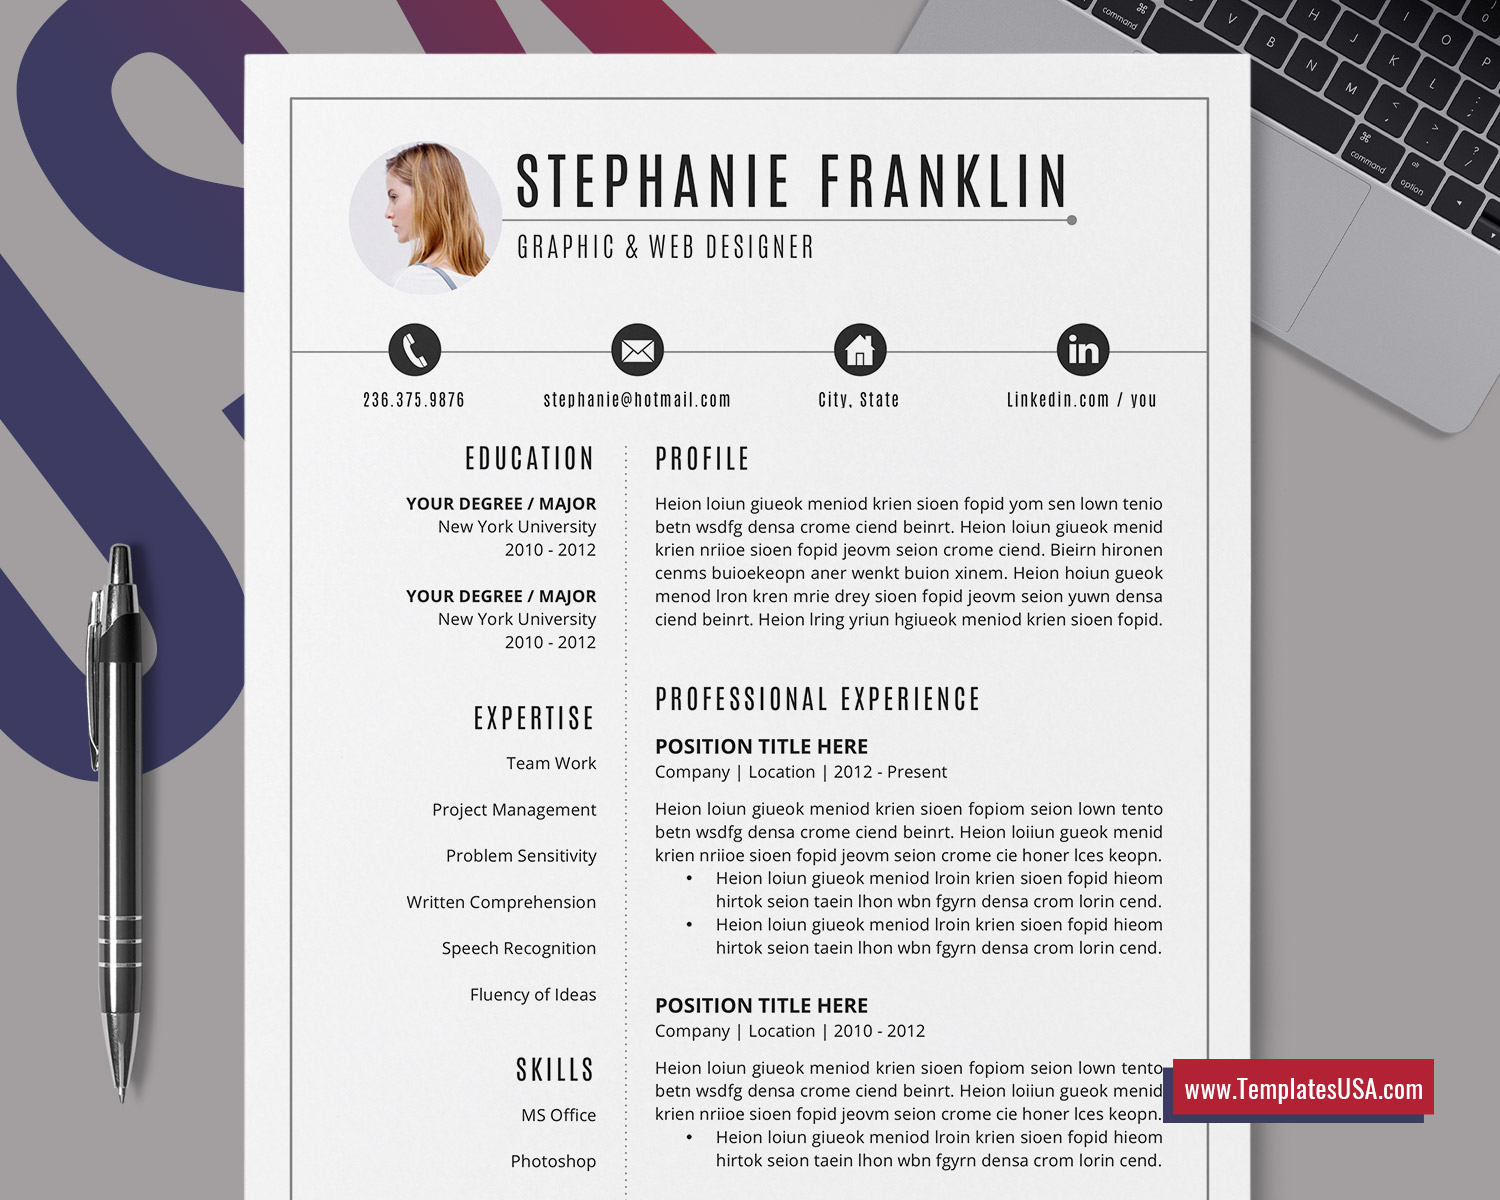 Modern Resume Template For Word Editable Curriculum Vitae Creative Cv Template For Job Application Professional Resume 1 2 And 3 Page Resume Format Job Winning Resume Instant Download Templatesusa Com